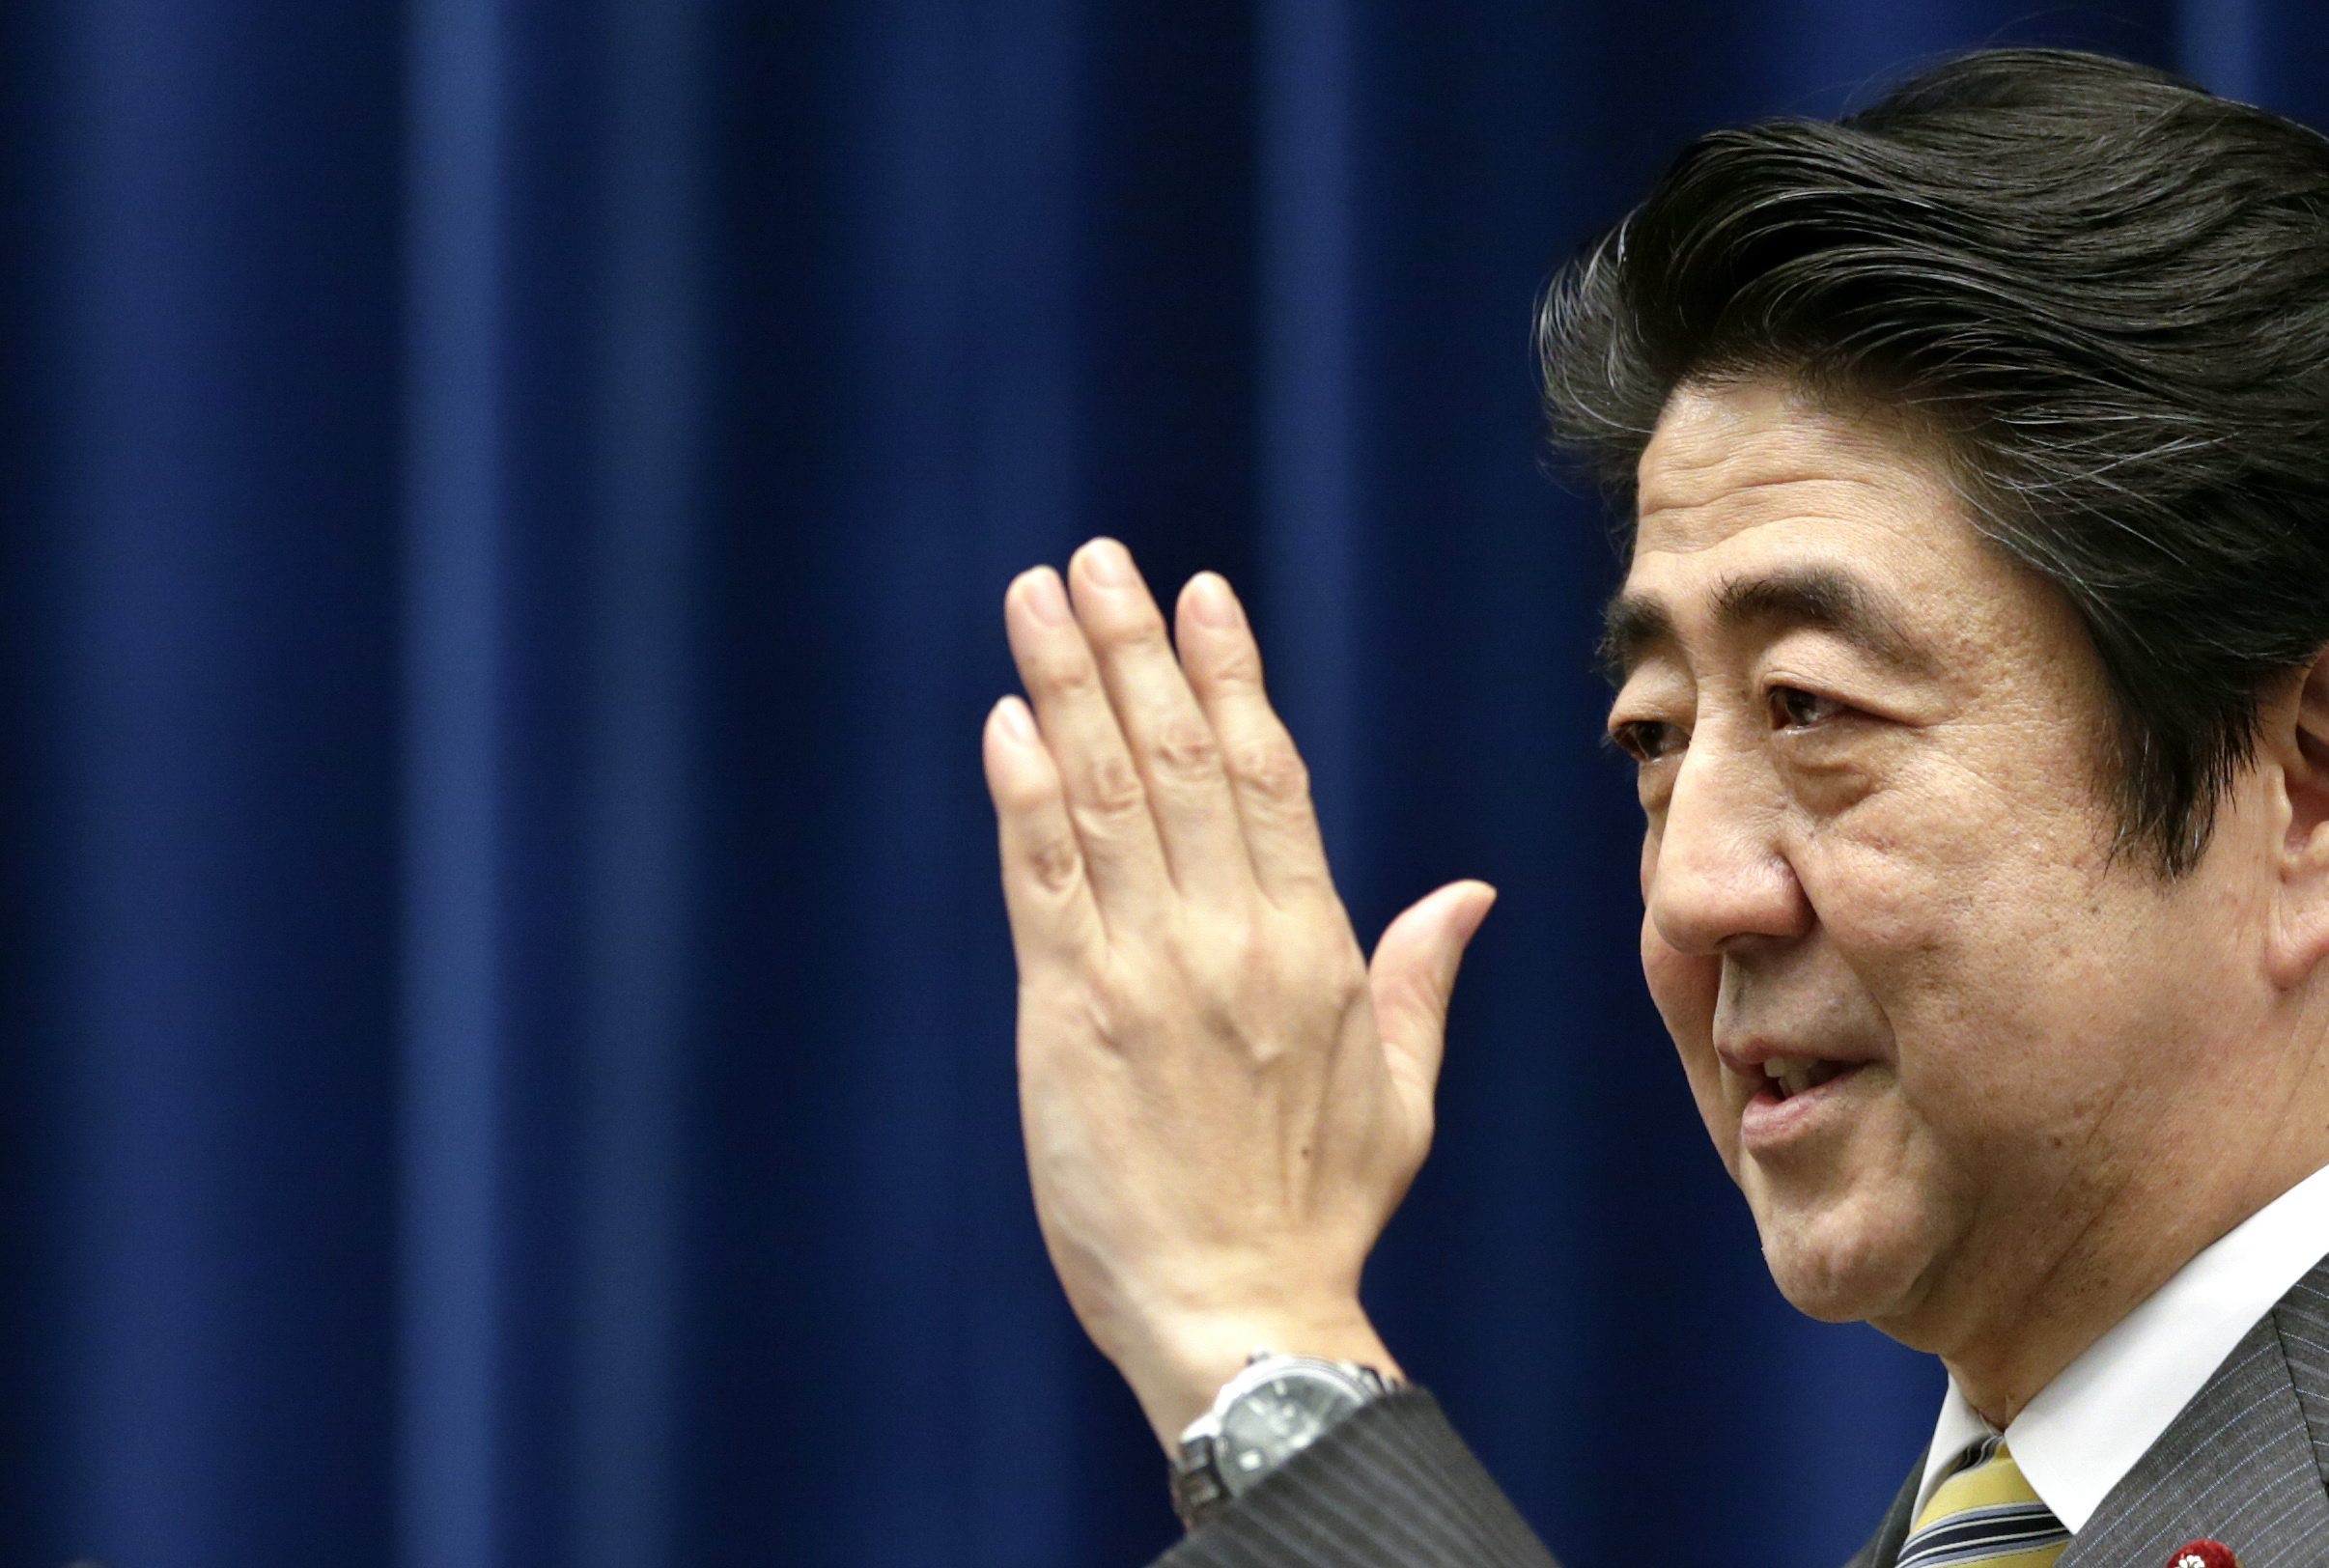 The first and second arrows of Abenomics have achieved considerable success. The last arrow aims at increasing the economy's real productive capacity. Photo: EPA